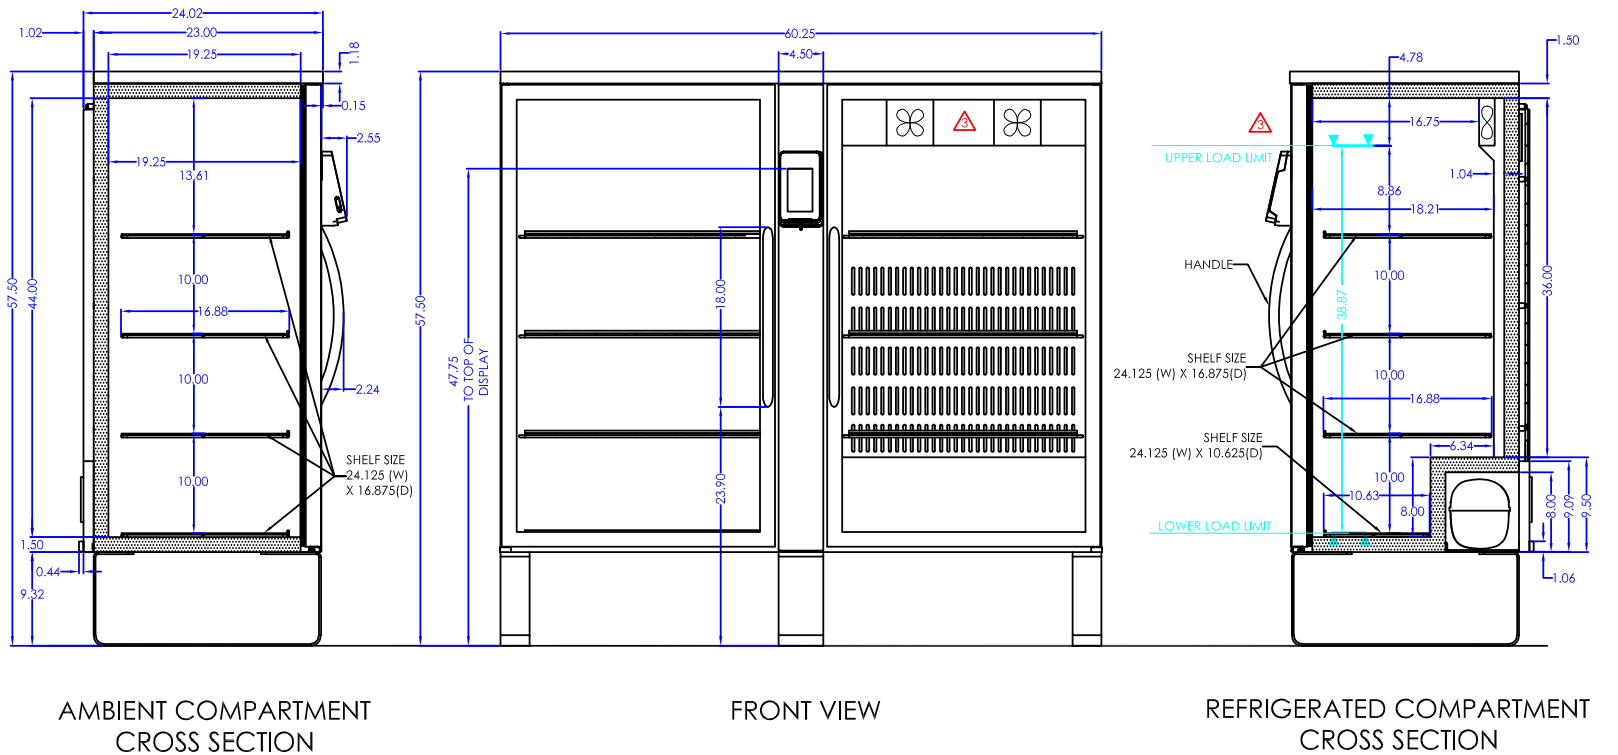 Stockwell_2.0_Diagram_-Front_and_Multiple_Side_views.png